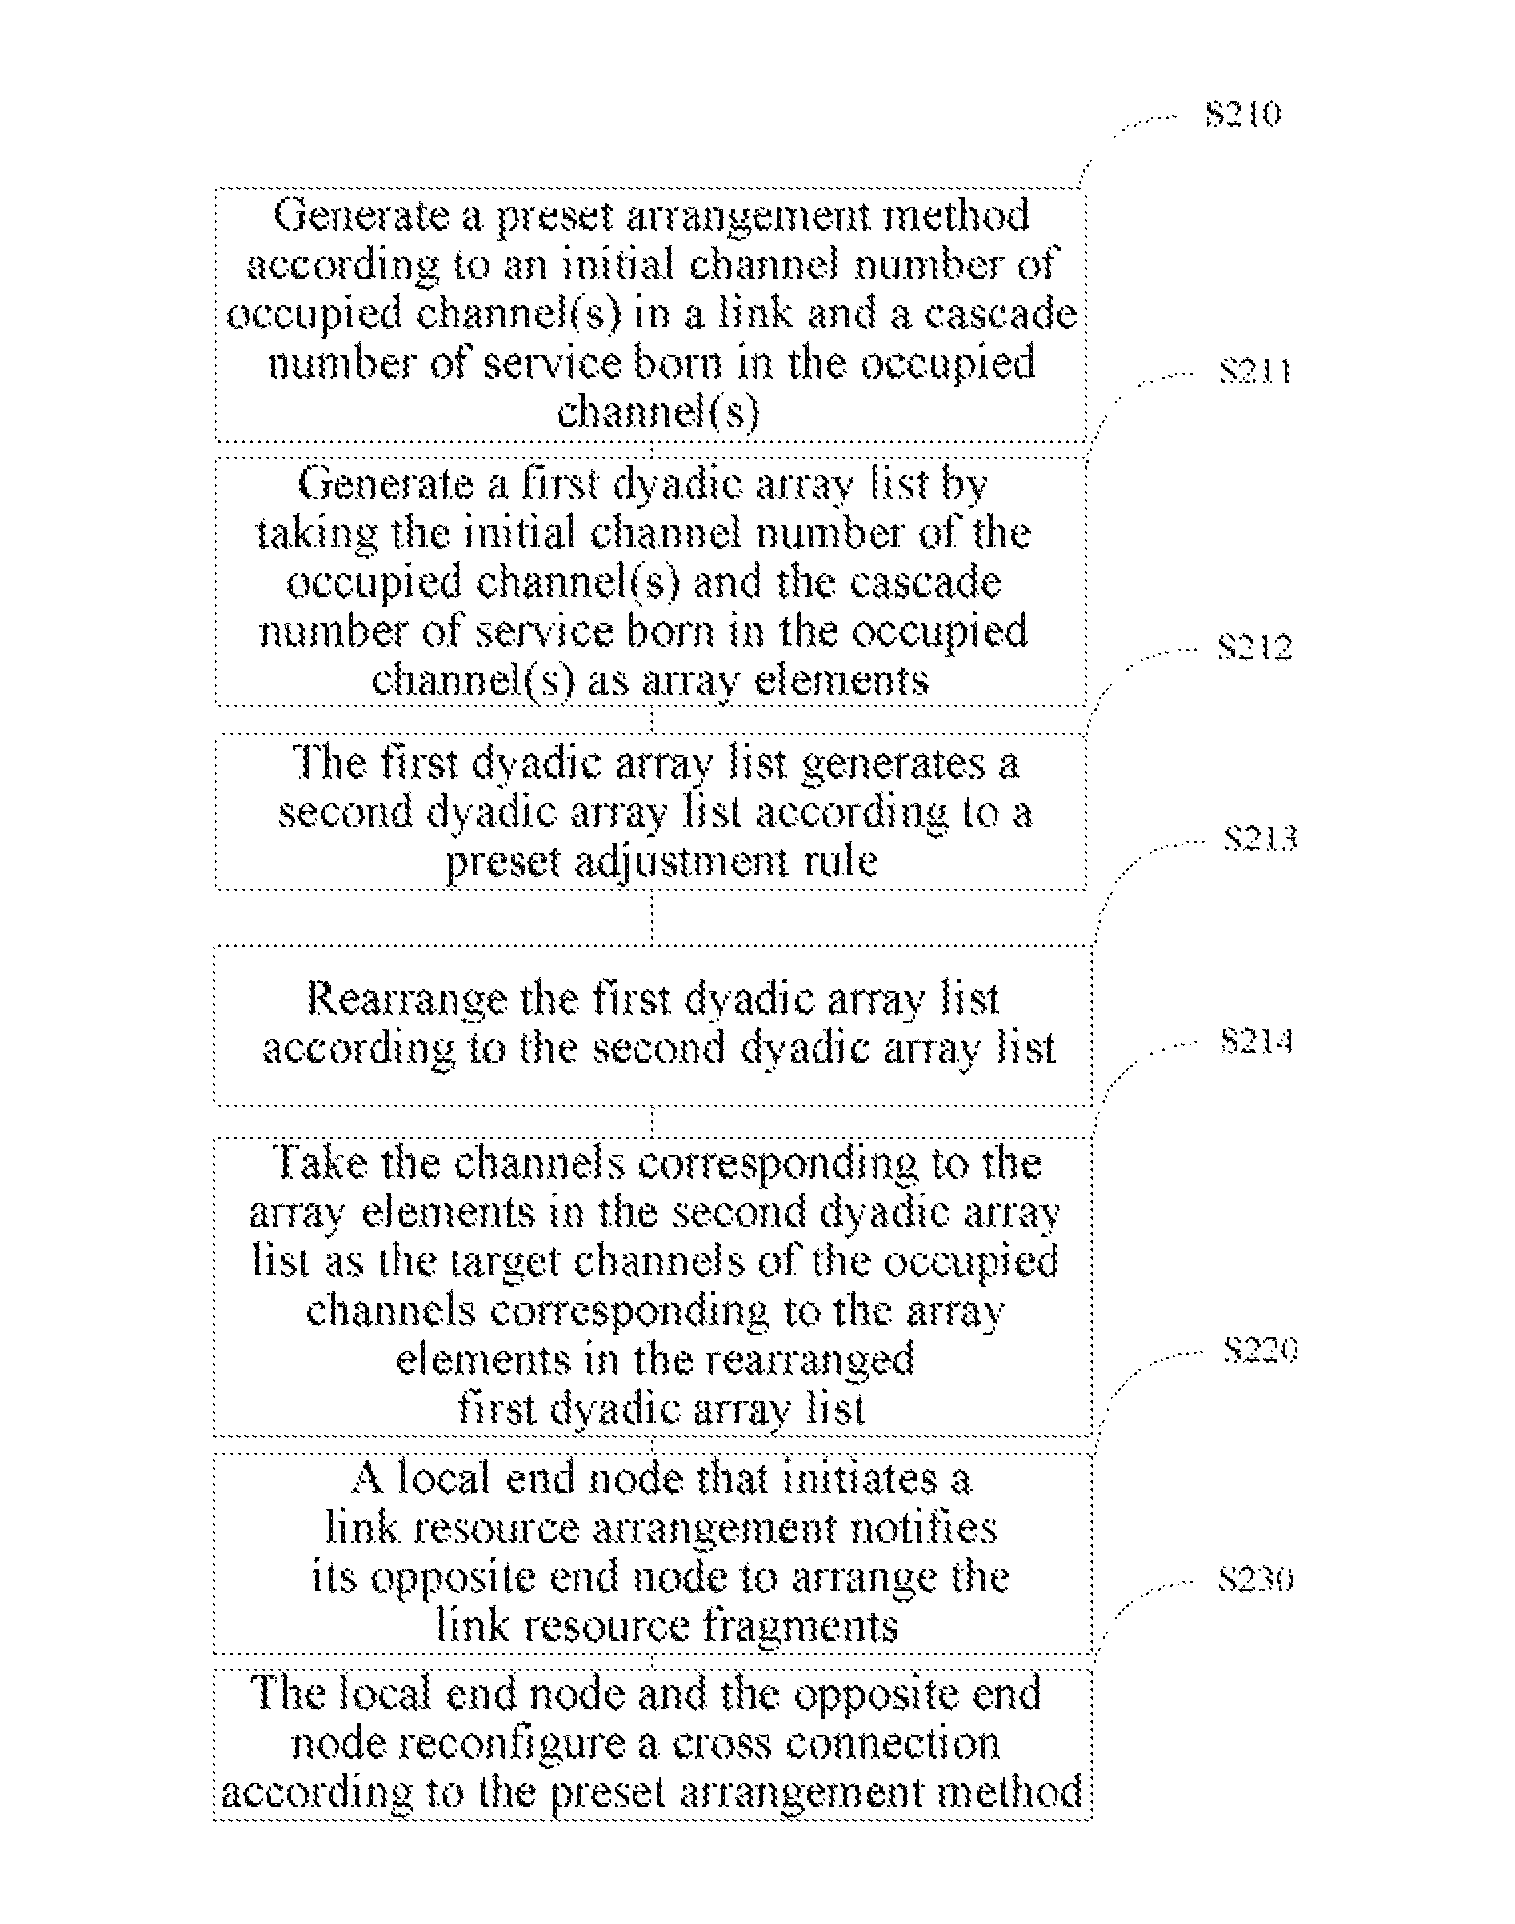 Method and system for arranging link resource fragments